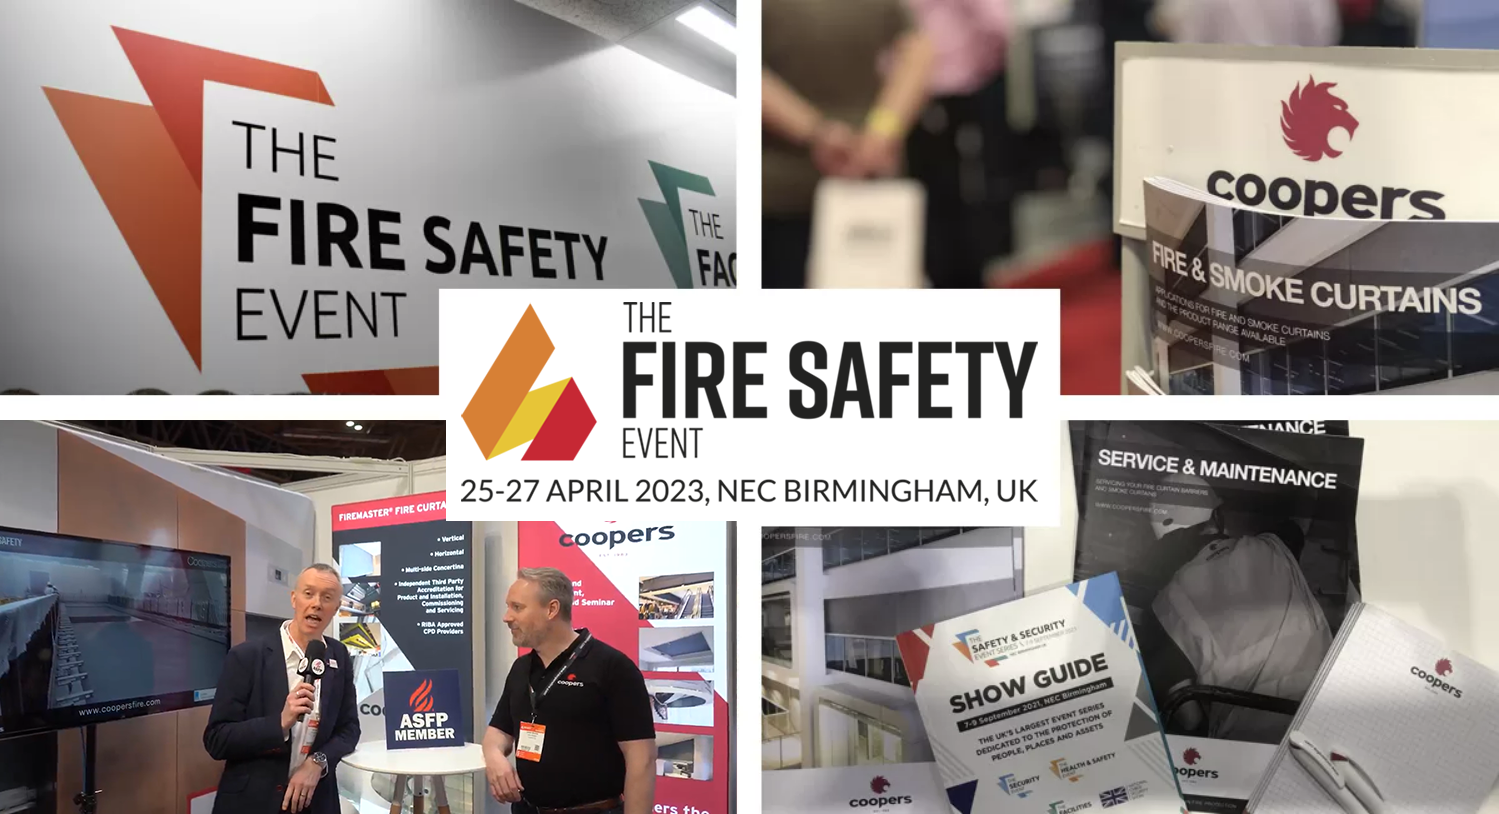 Coopers Fire are exhibiting at The Fire Safety Event 2023